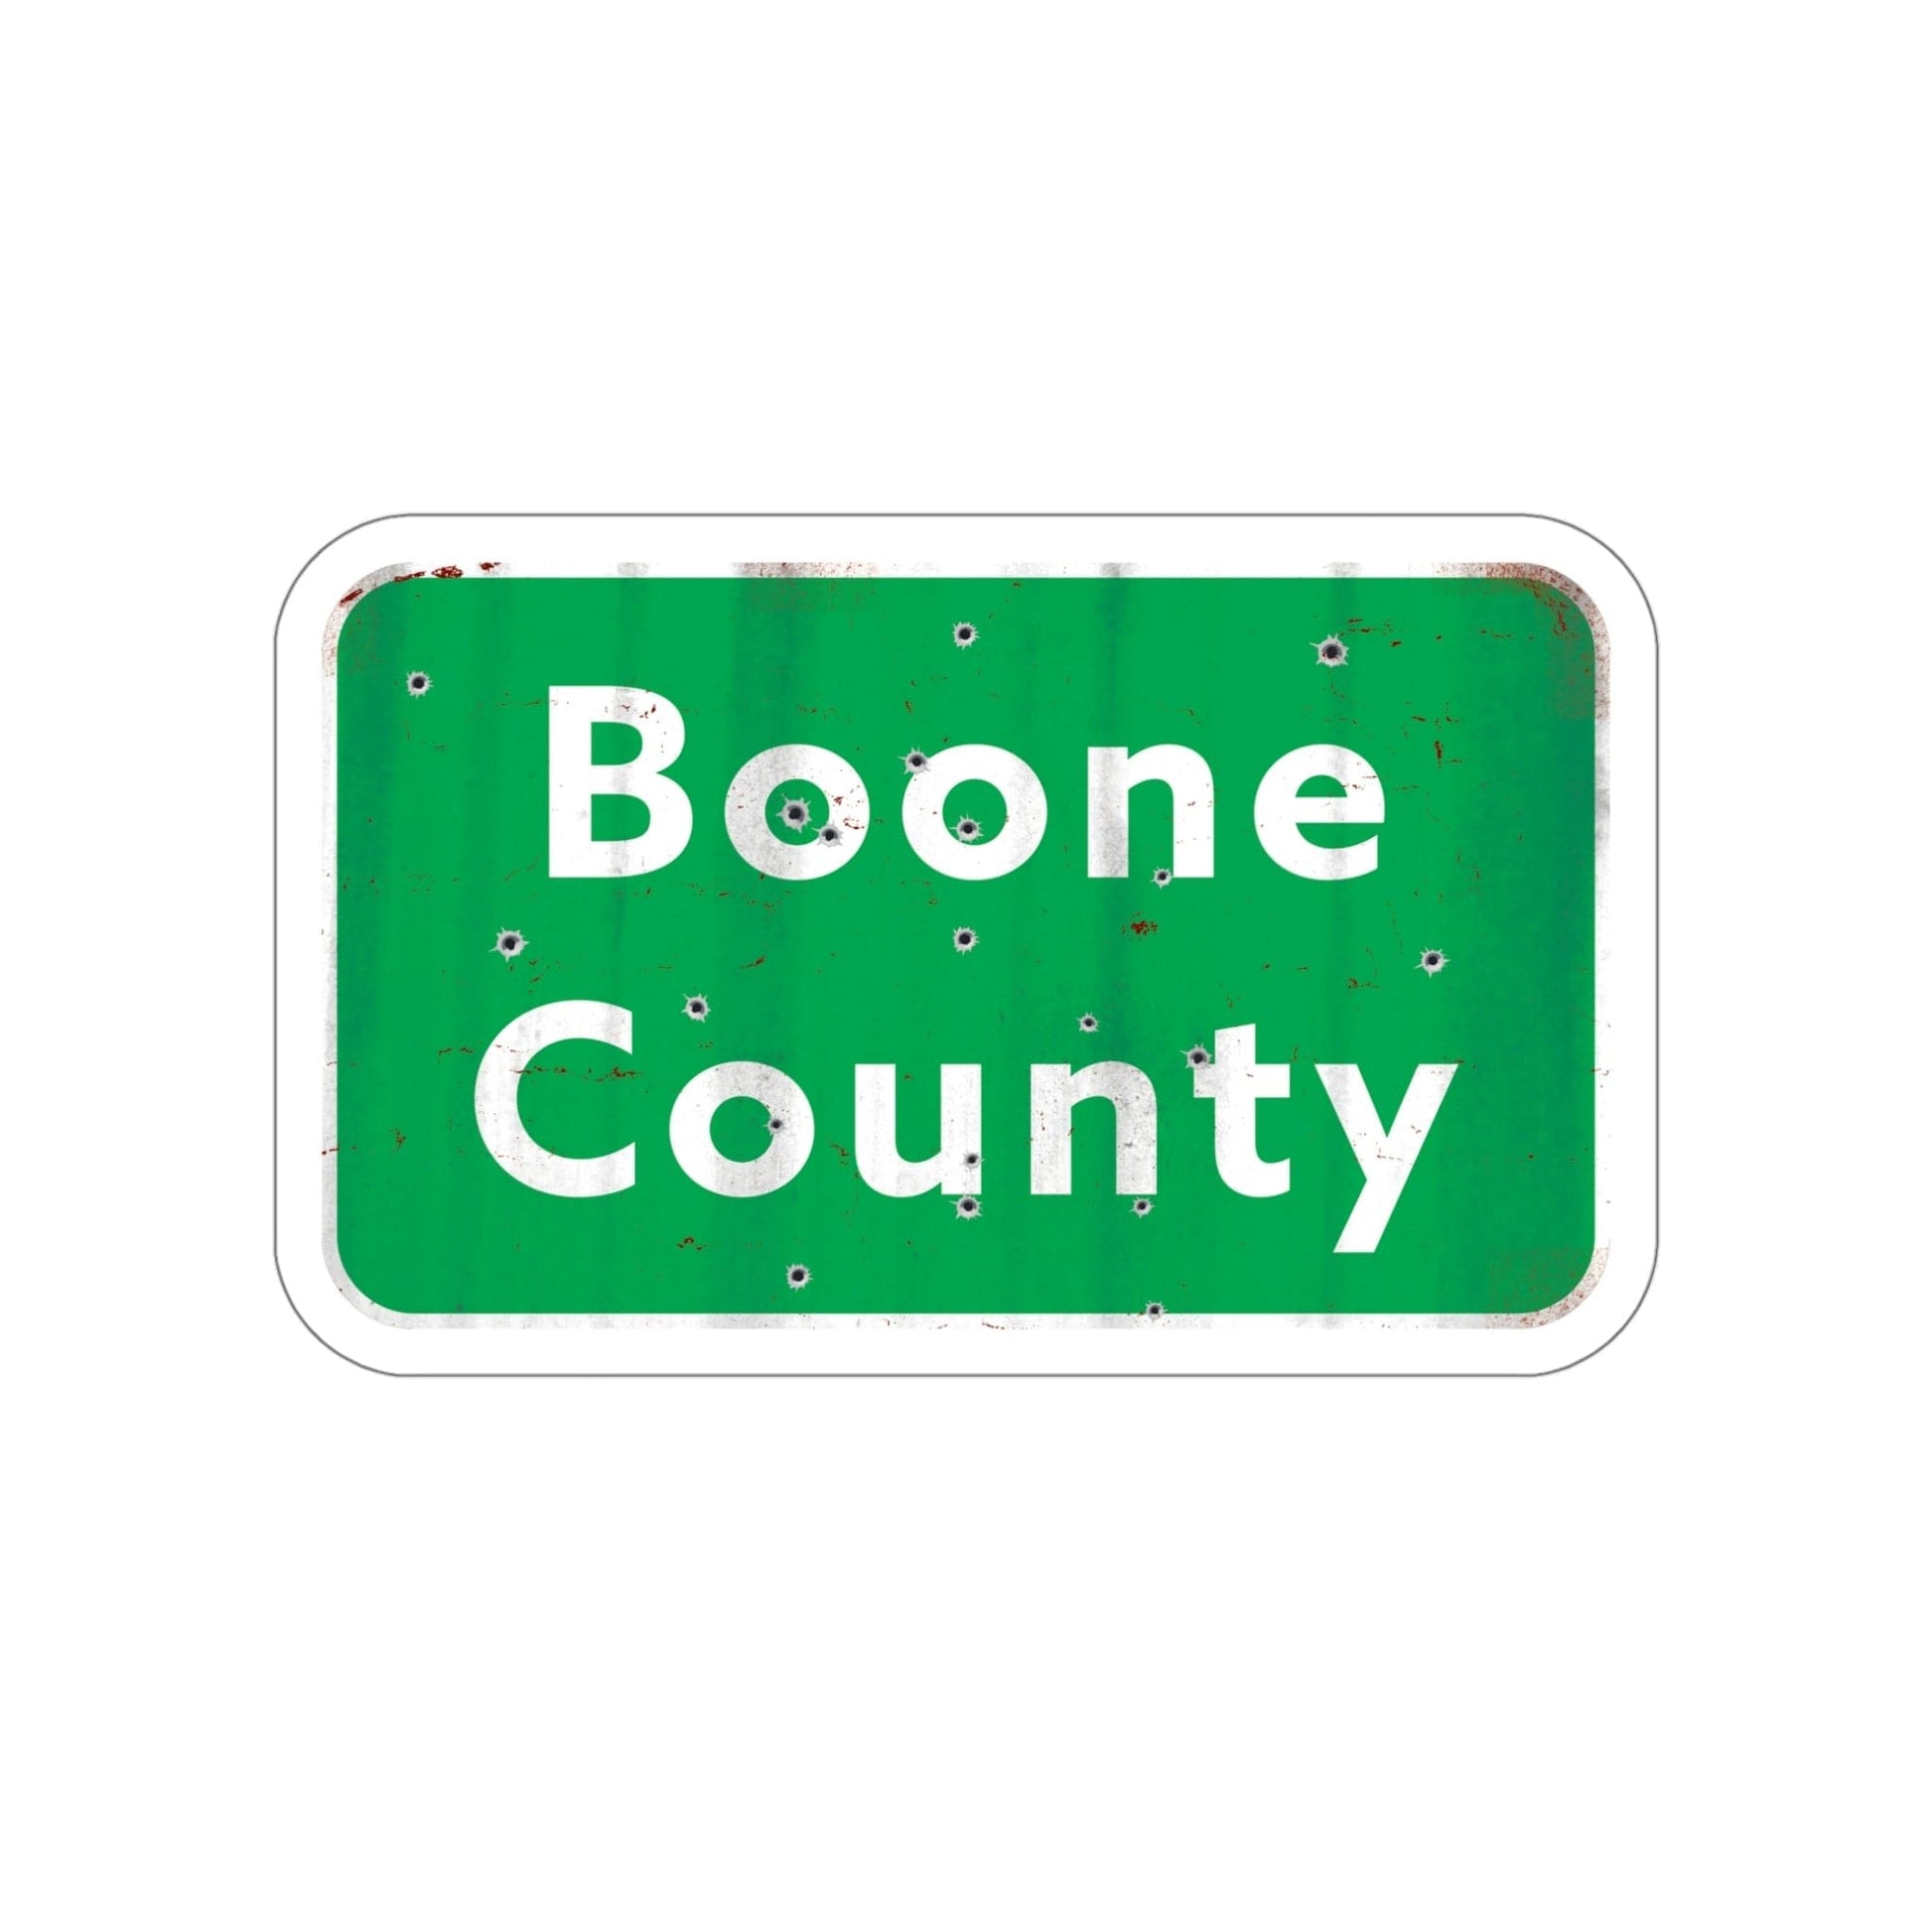 Boone County - 5" Sticker in the color: - Kaspers Tees